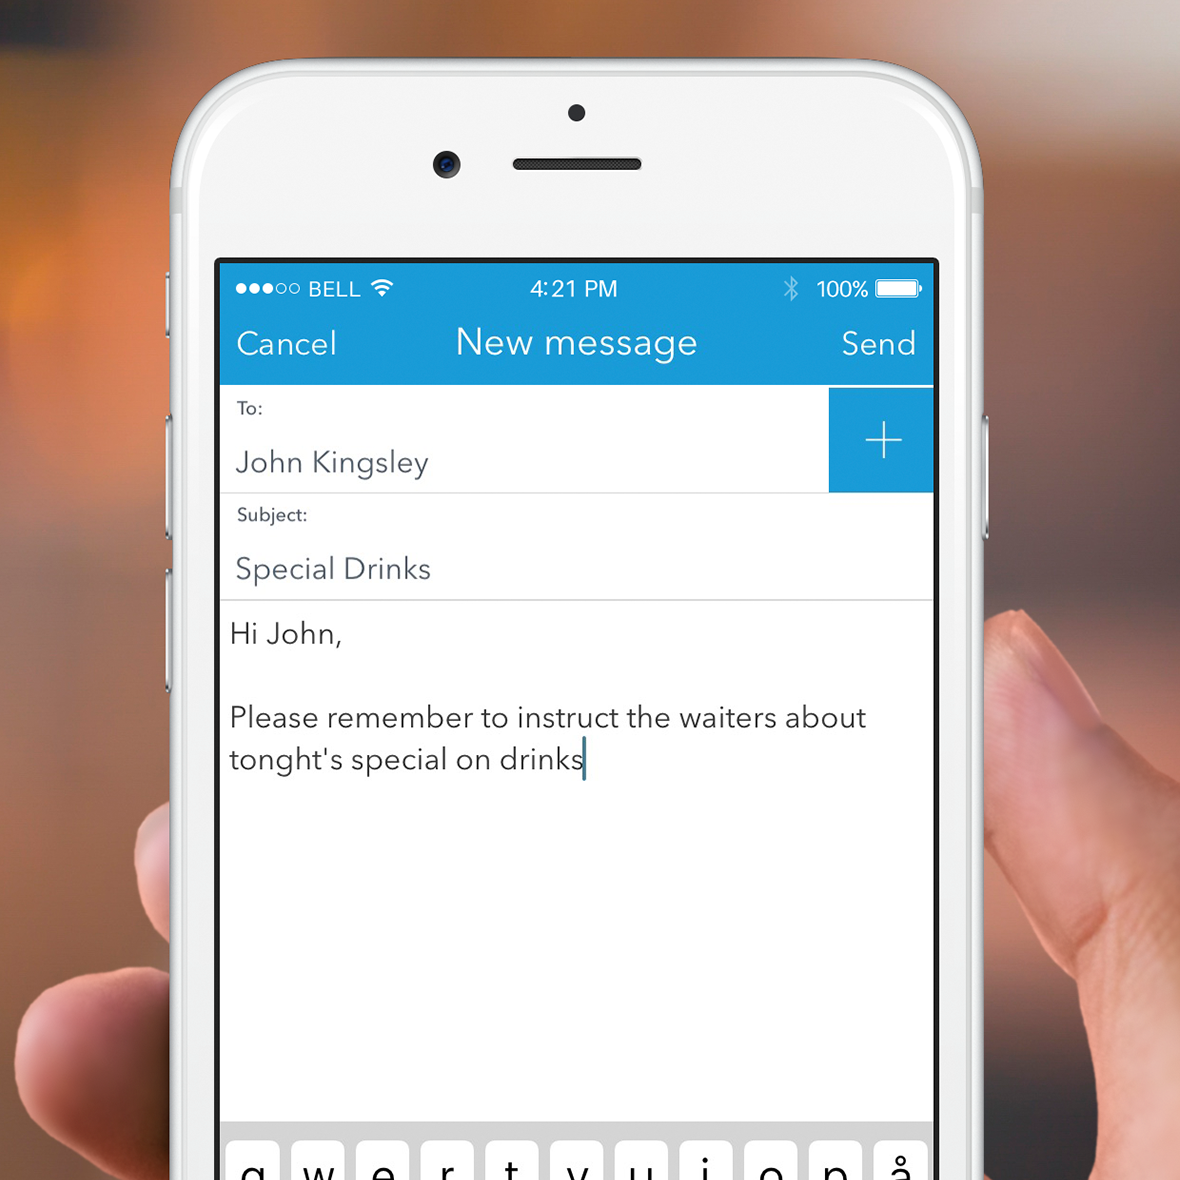 Planday Software - App: Easily communicate with staff